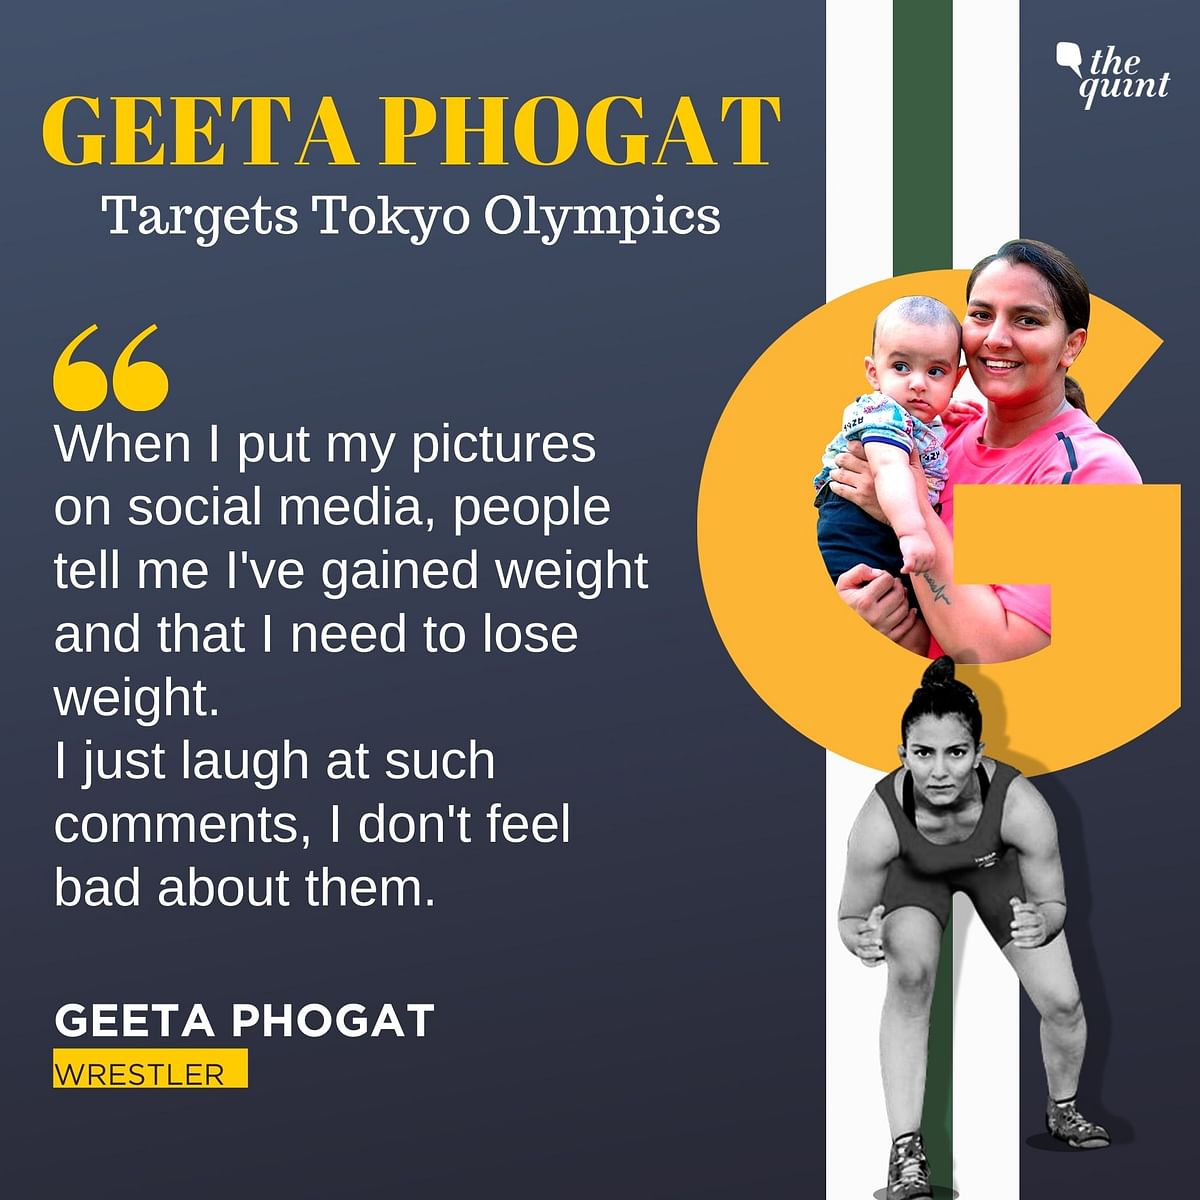 Seven months after giving birth to her first child, Geeta Phogat is aiming to make a comeback at the Tokyo Olympics.